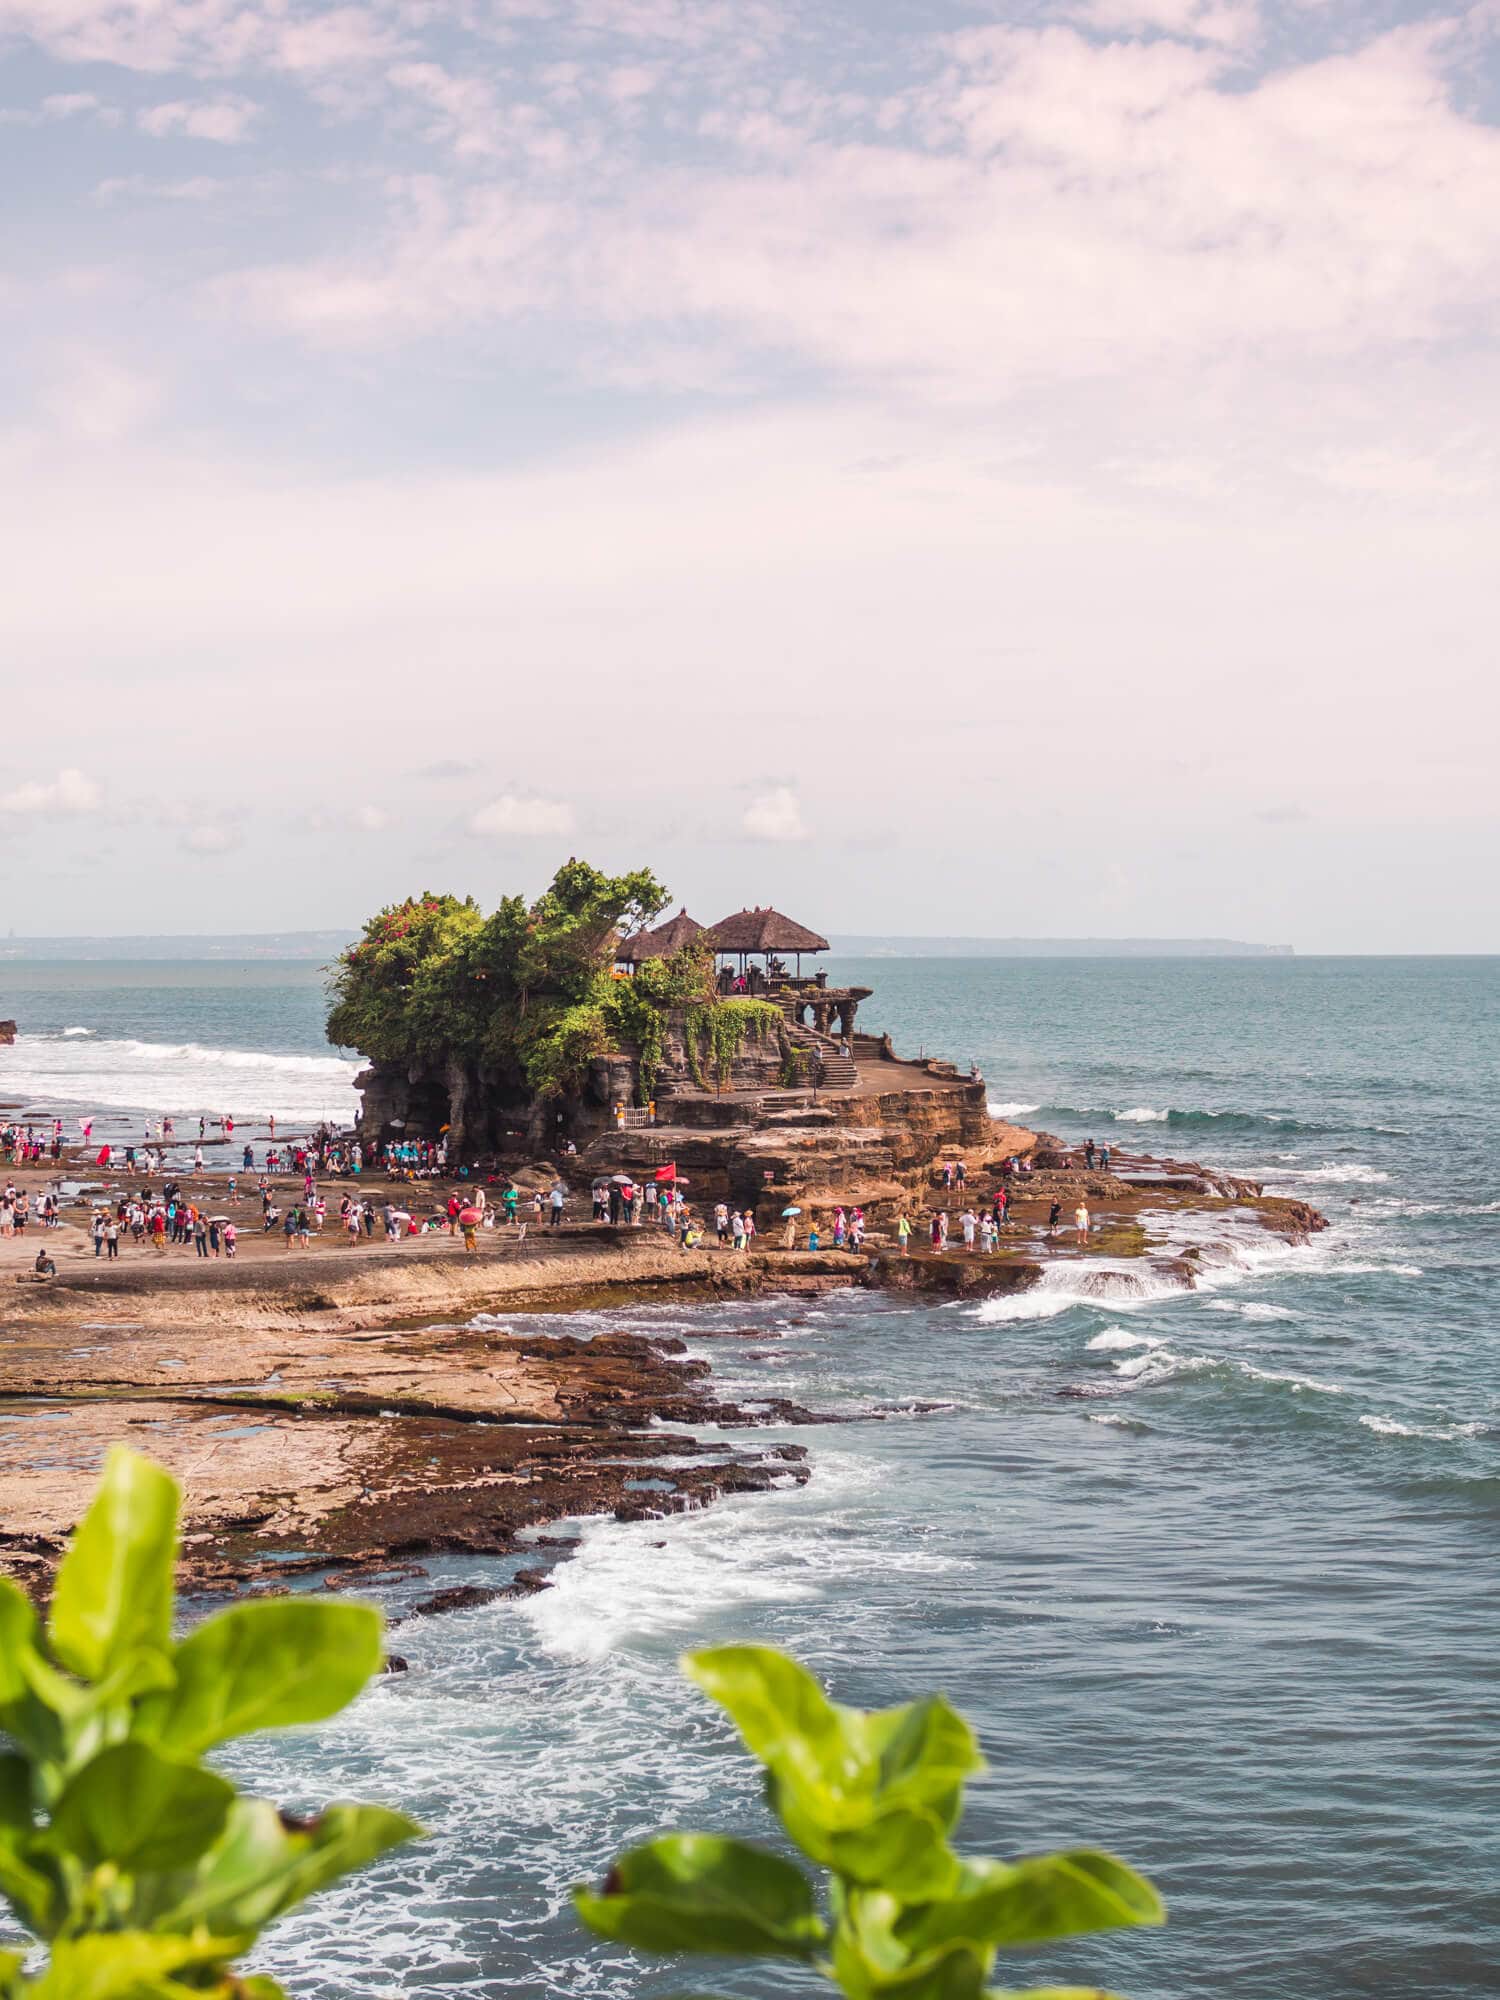 View of Tanah Lot temple set on a rocky outcrop in the water, just outside Canggu. The sky is turning purple for sunset as a large group of people make their way to the temple. A must on any 2-week Bali itinerary.